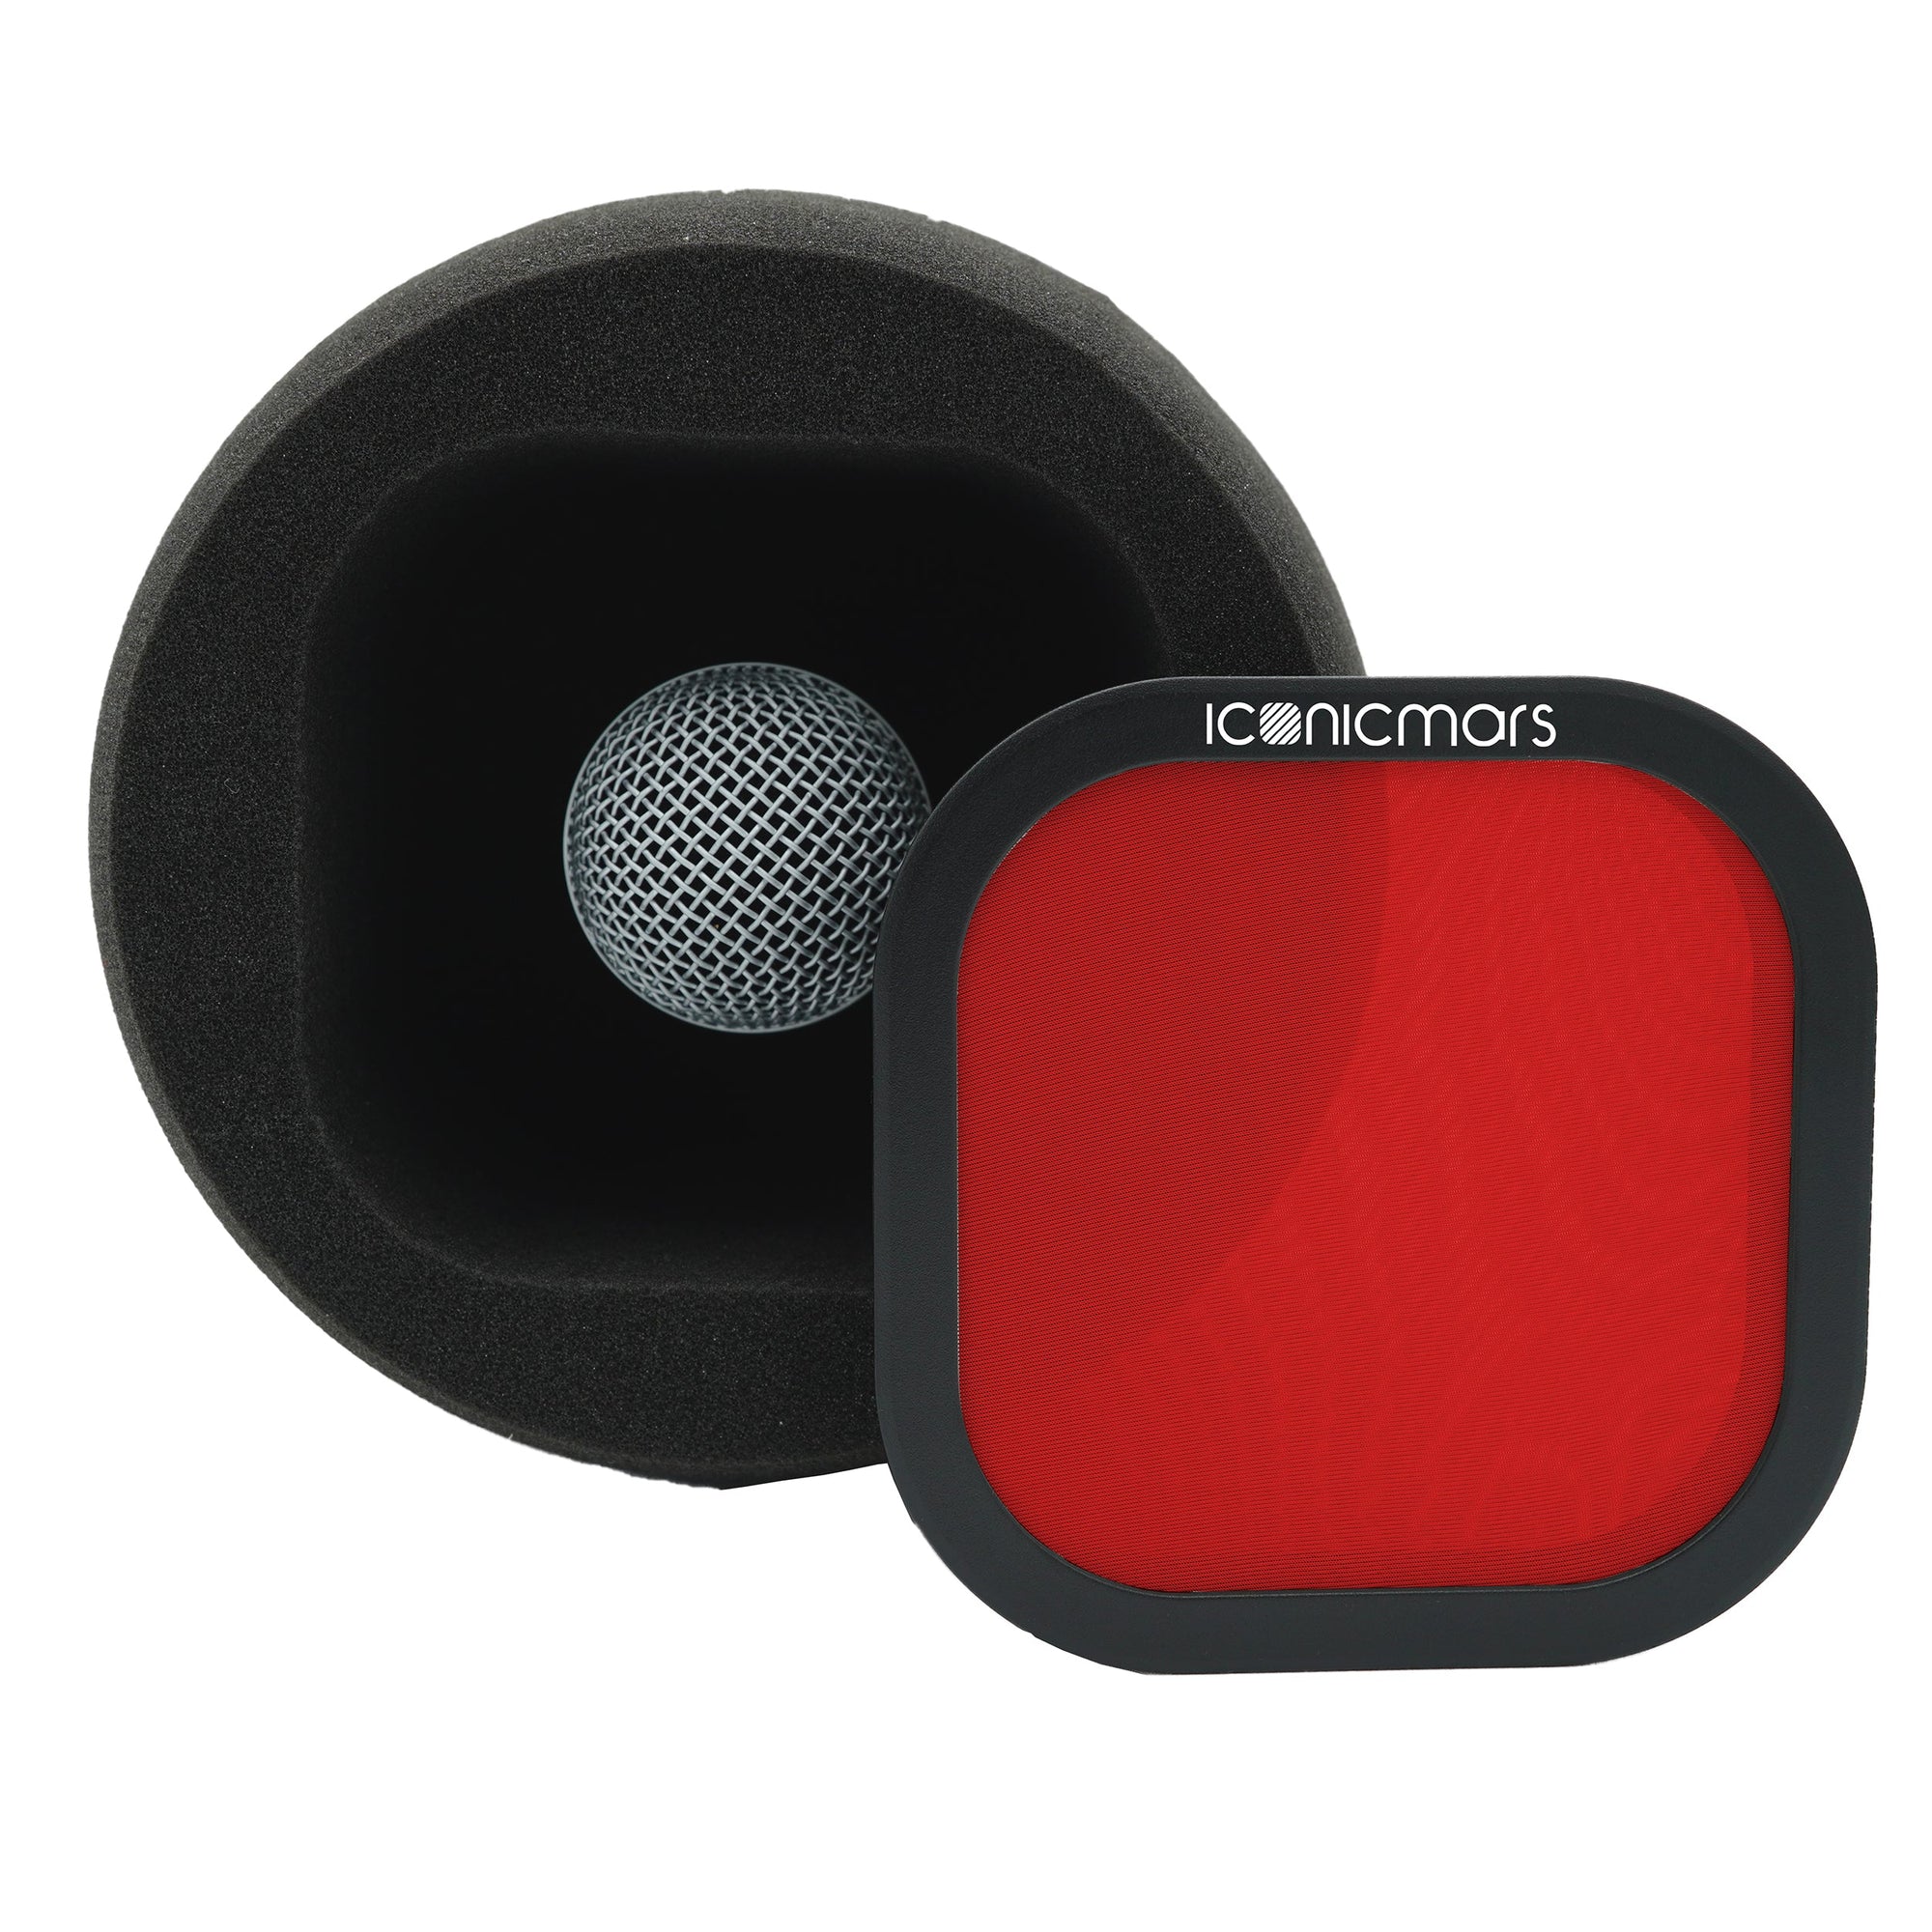 Comet X7A with dual layer mesh pop filter, filter is off and showing mic acoustic isolation chamber  -- Retro Red